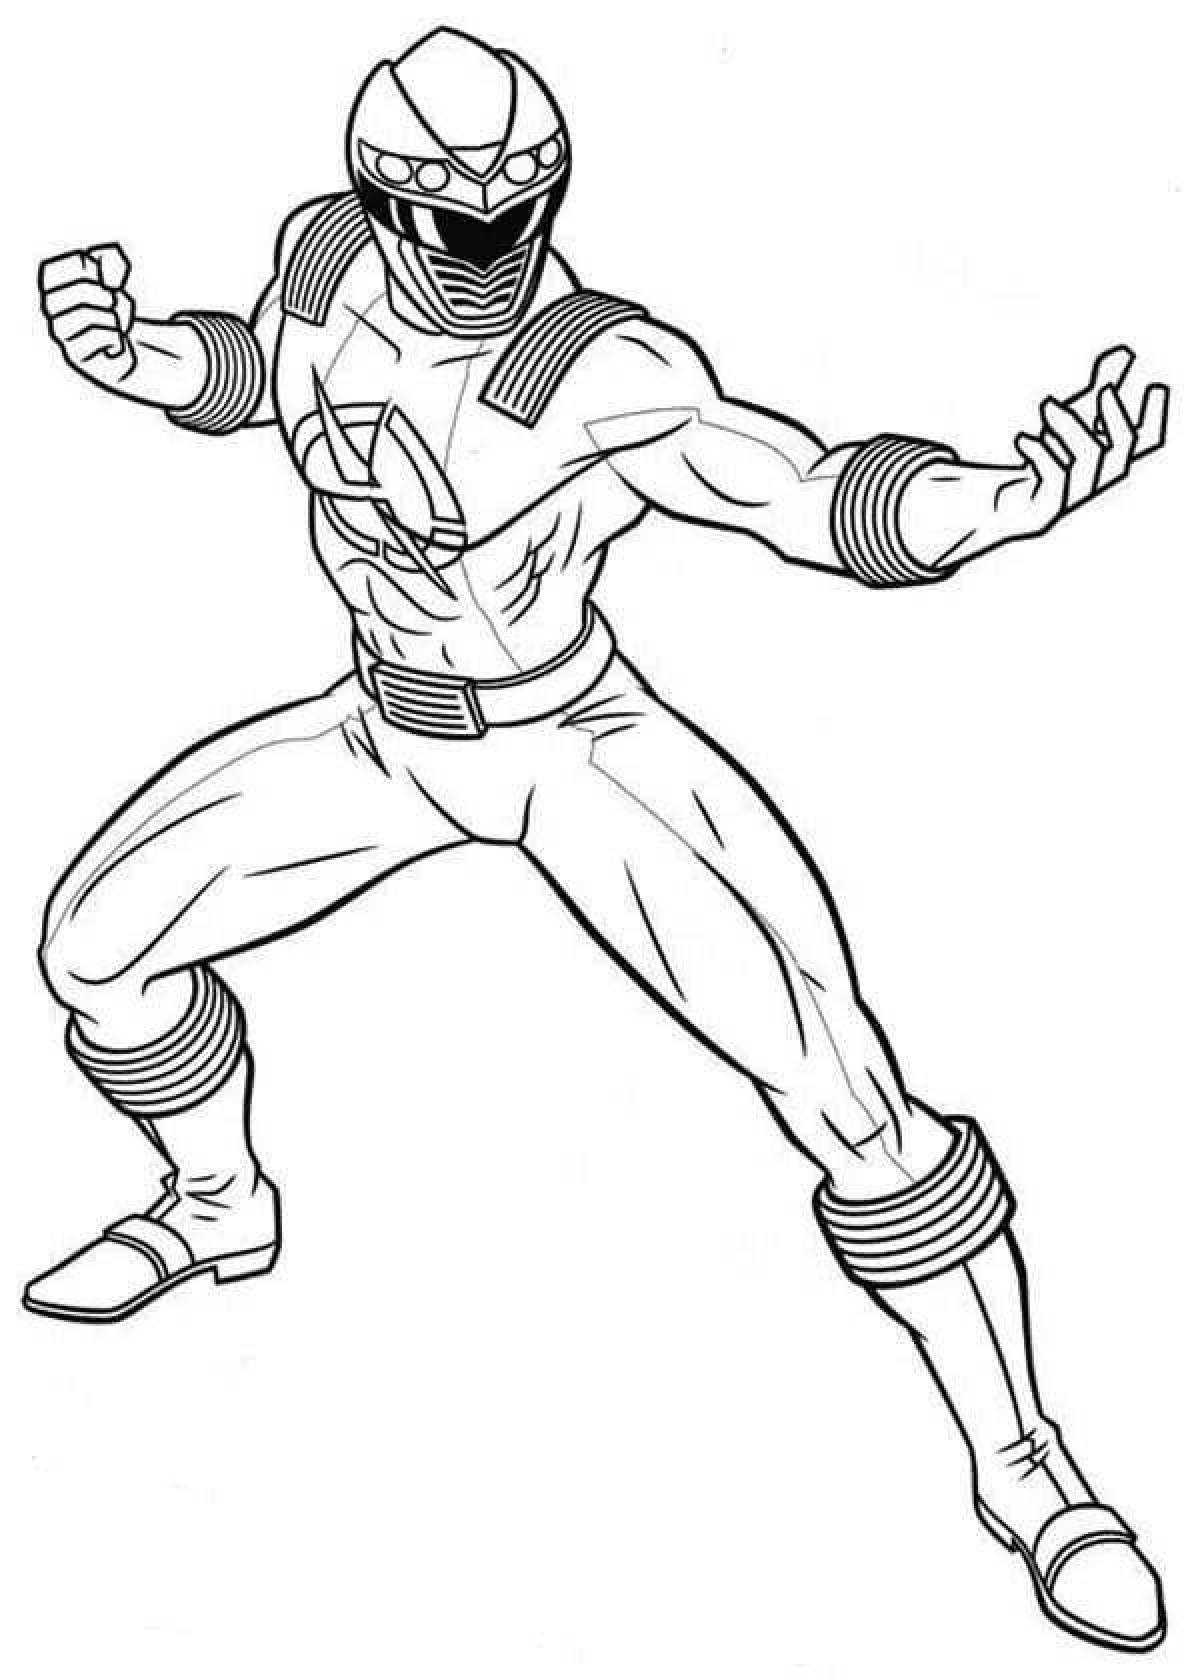 Colorful power rangers ninja storm coloring page